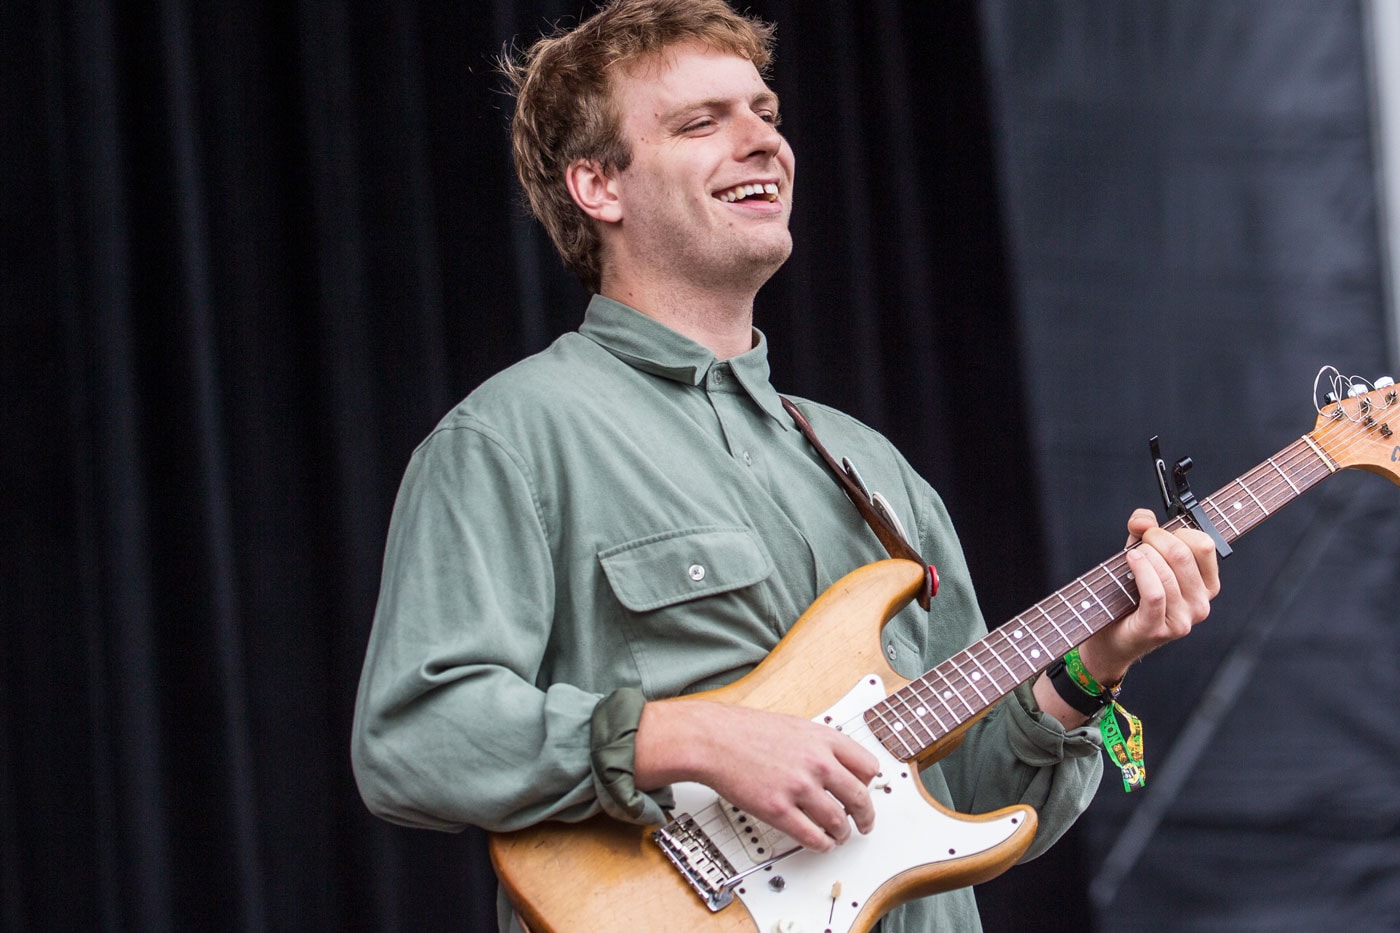 Watch Mac DeMarco Perform "No Other Heart" in a Rowboat